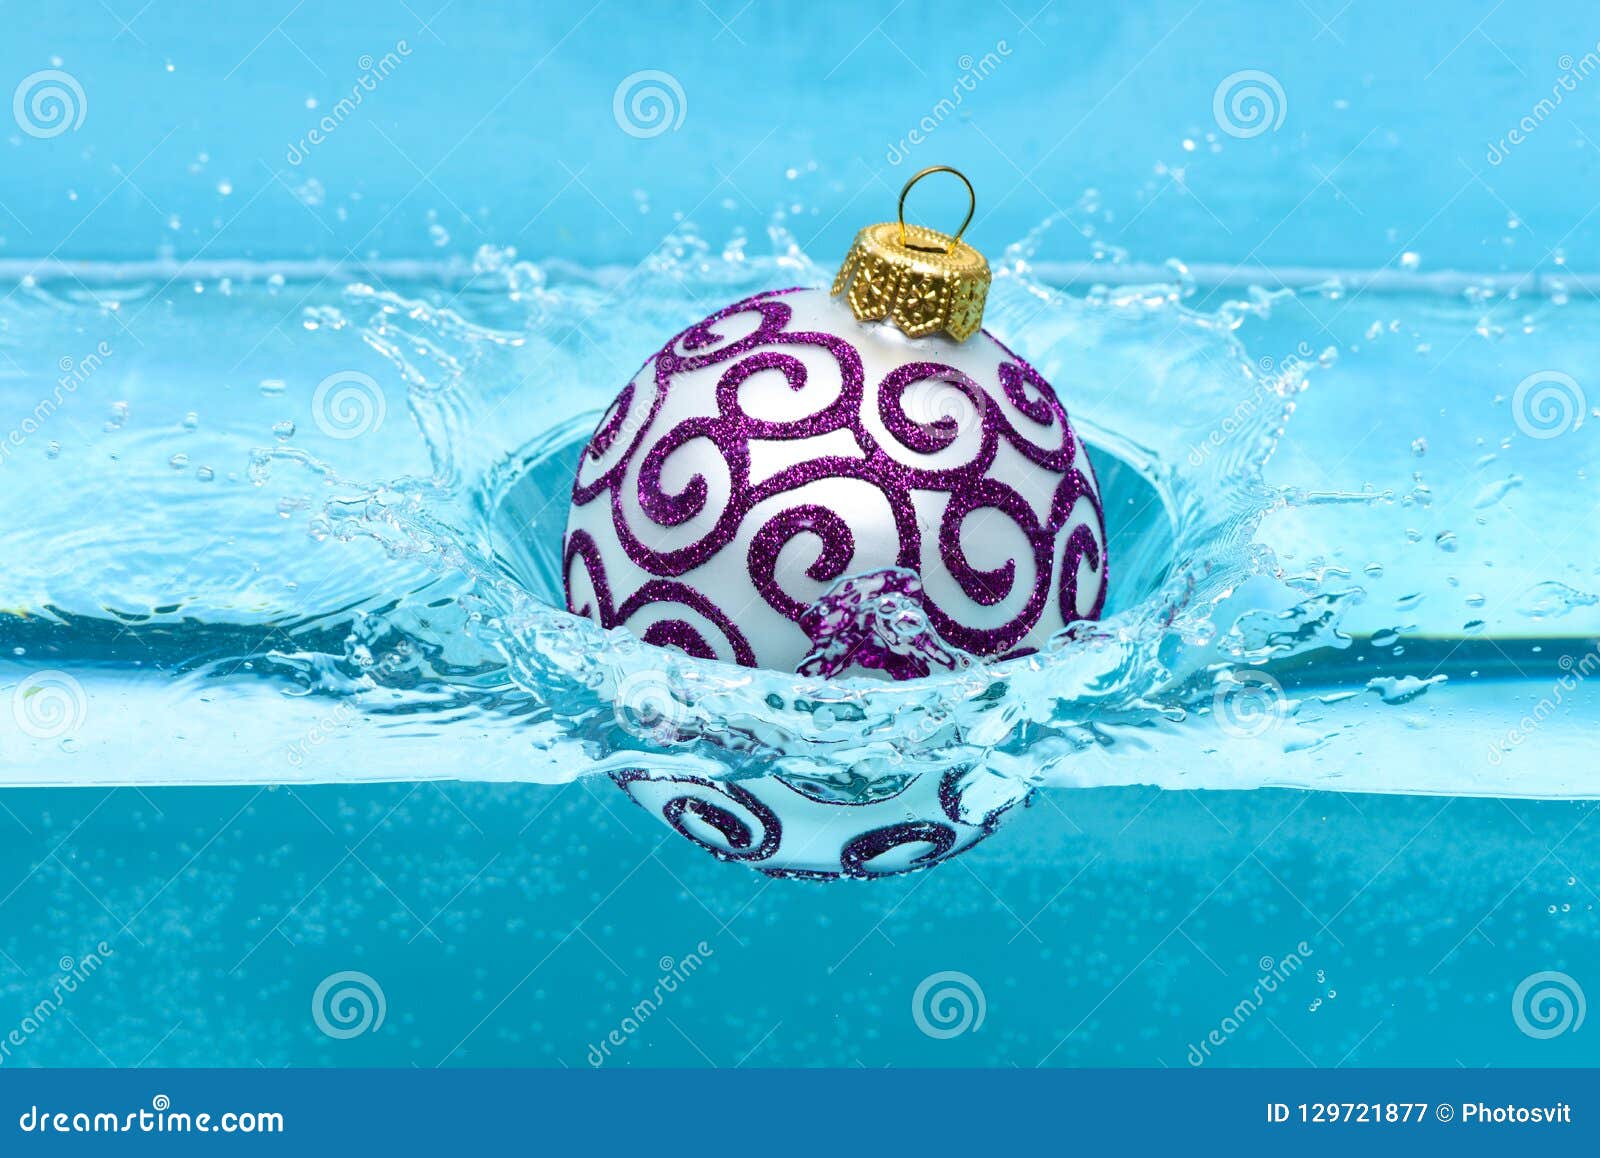 Swimmer Dude Blue Holiday Ornament